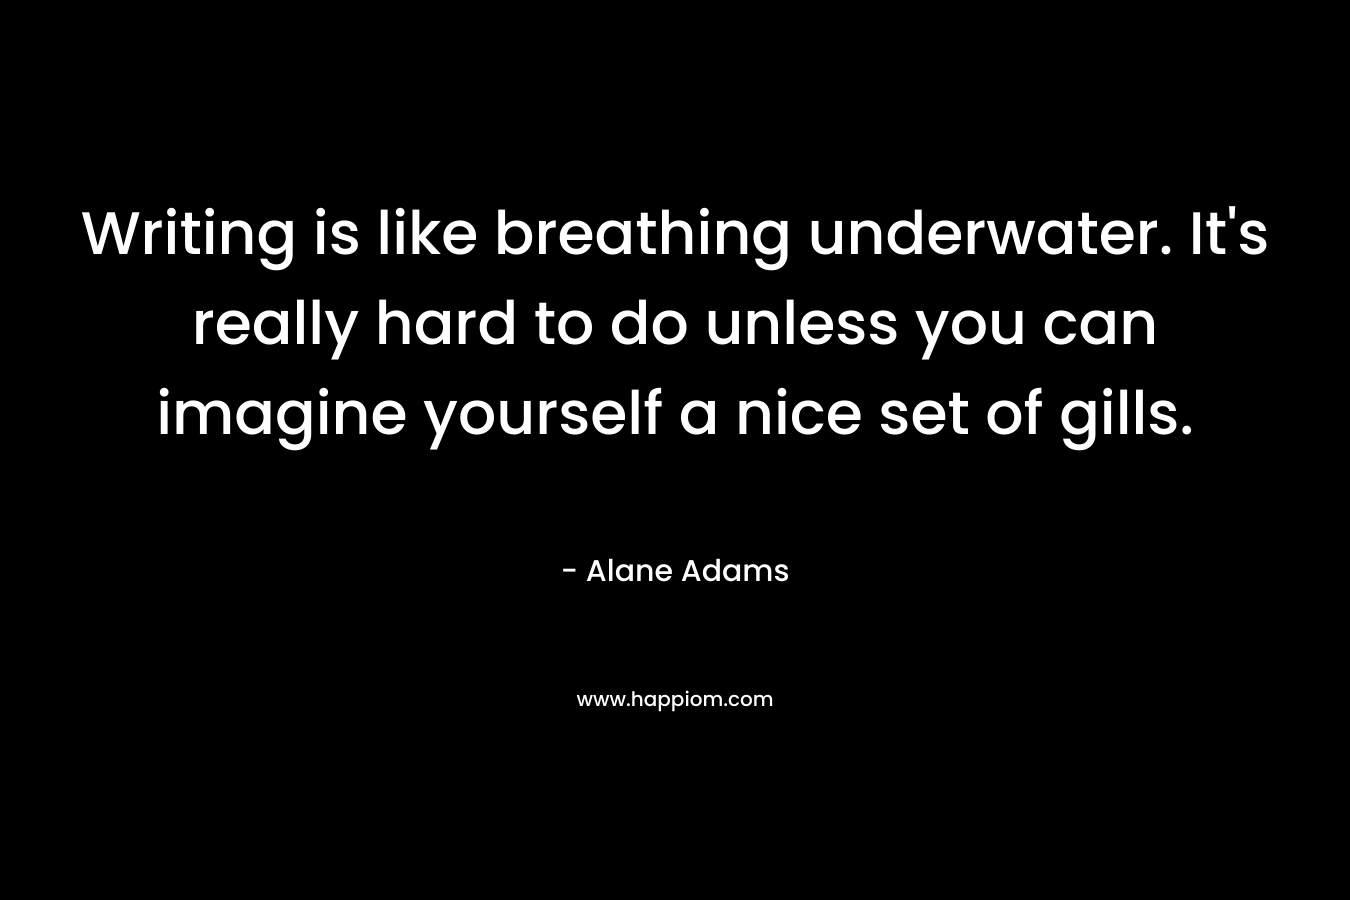 Writing is like breathing underwater. It’s really hard to do unless you can imagine yourself a nice set of gills. – Alane Adams